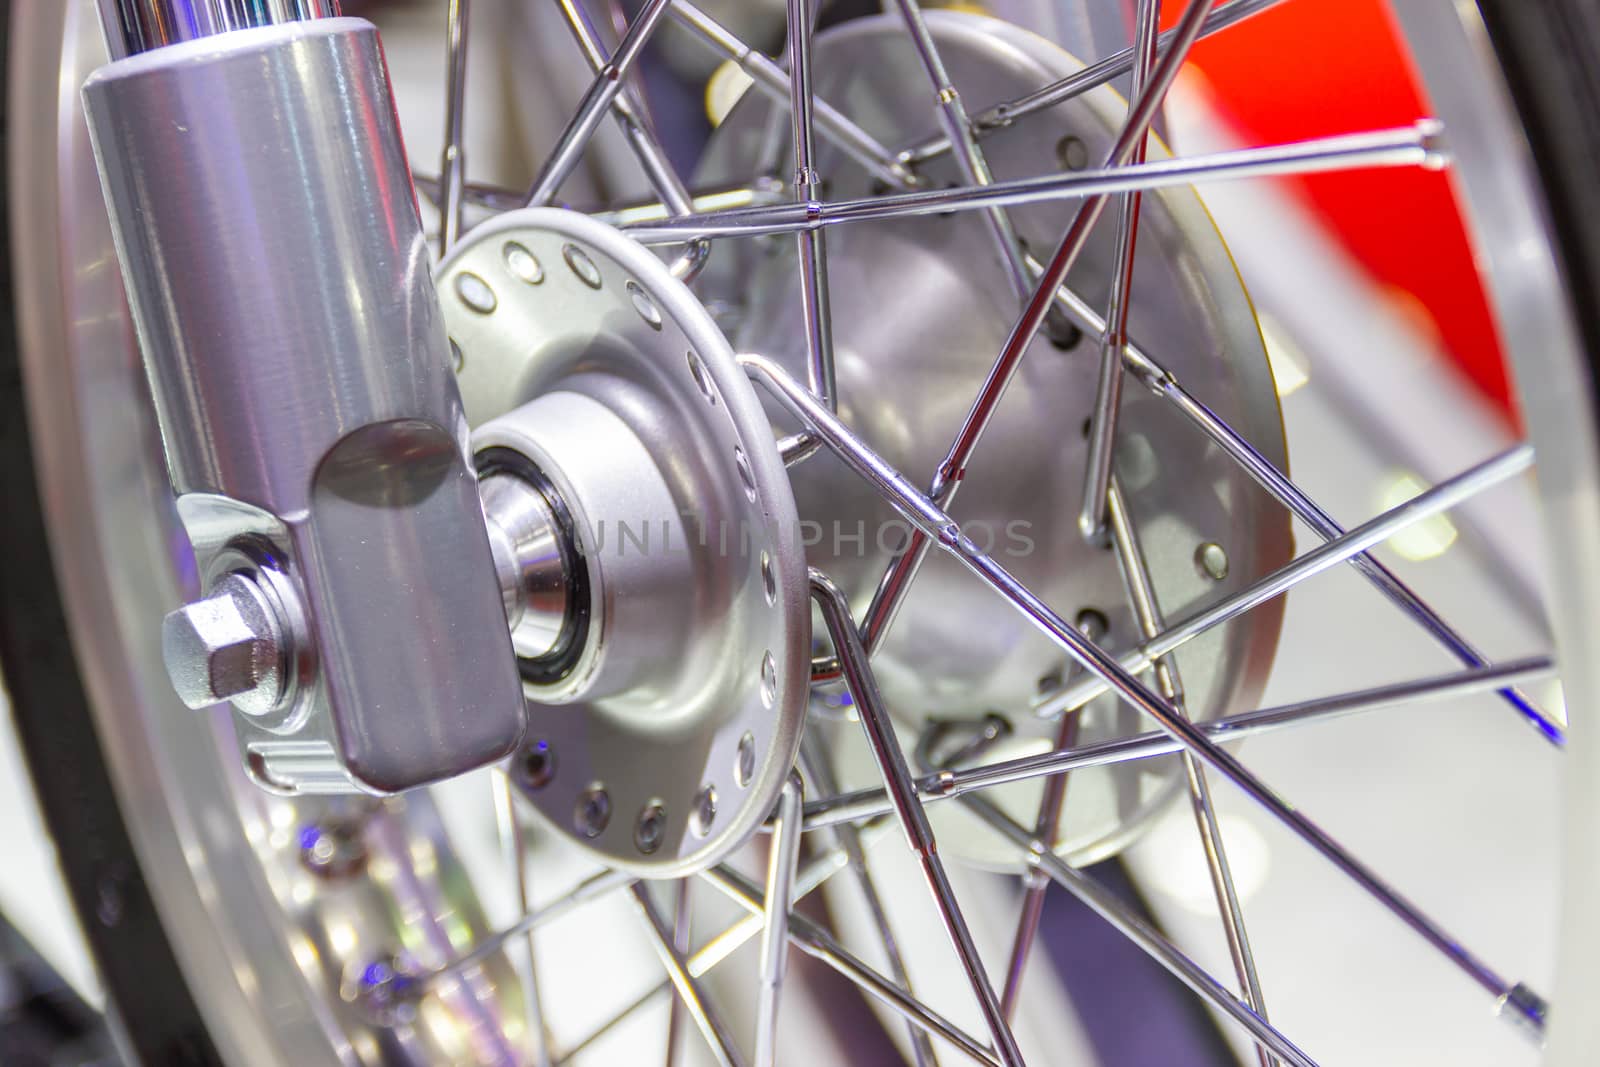 Motorcycle wheels, wire spokes of a motorcycle concept new design modern